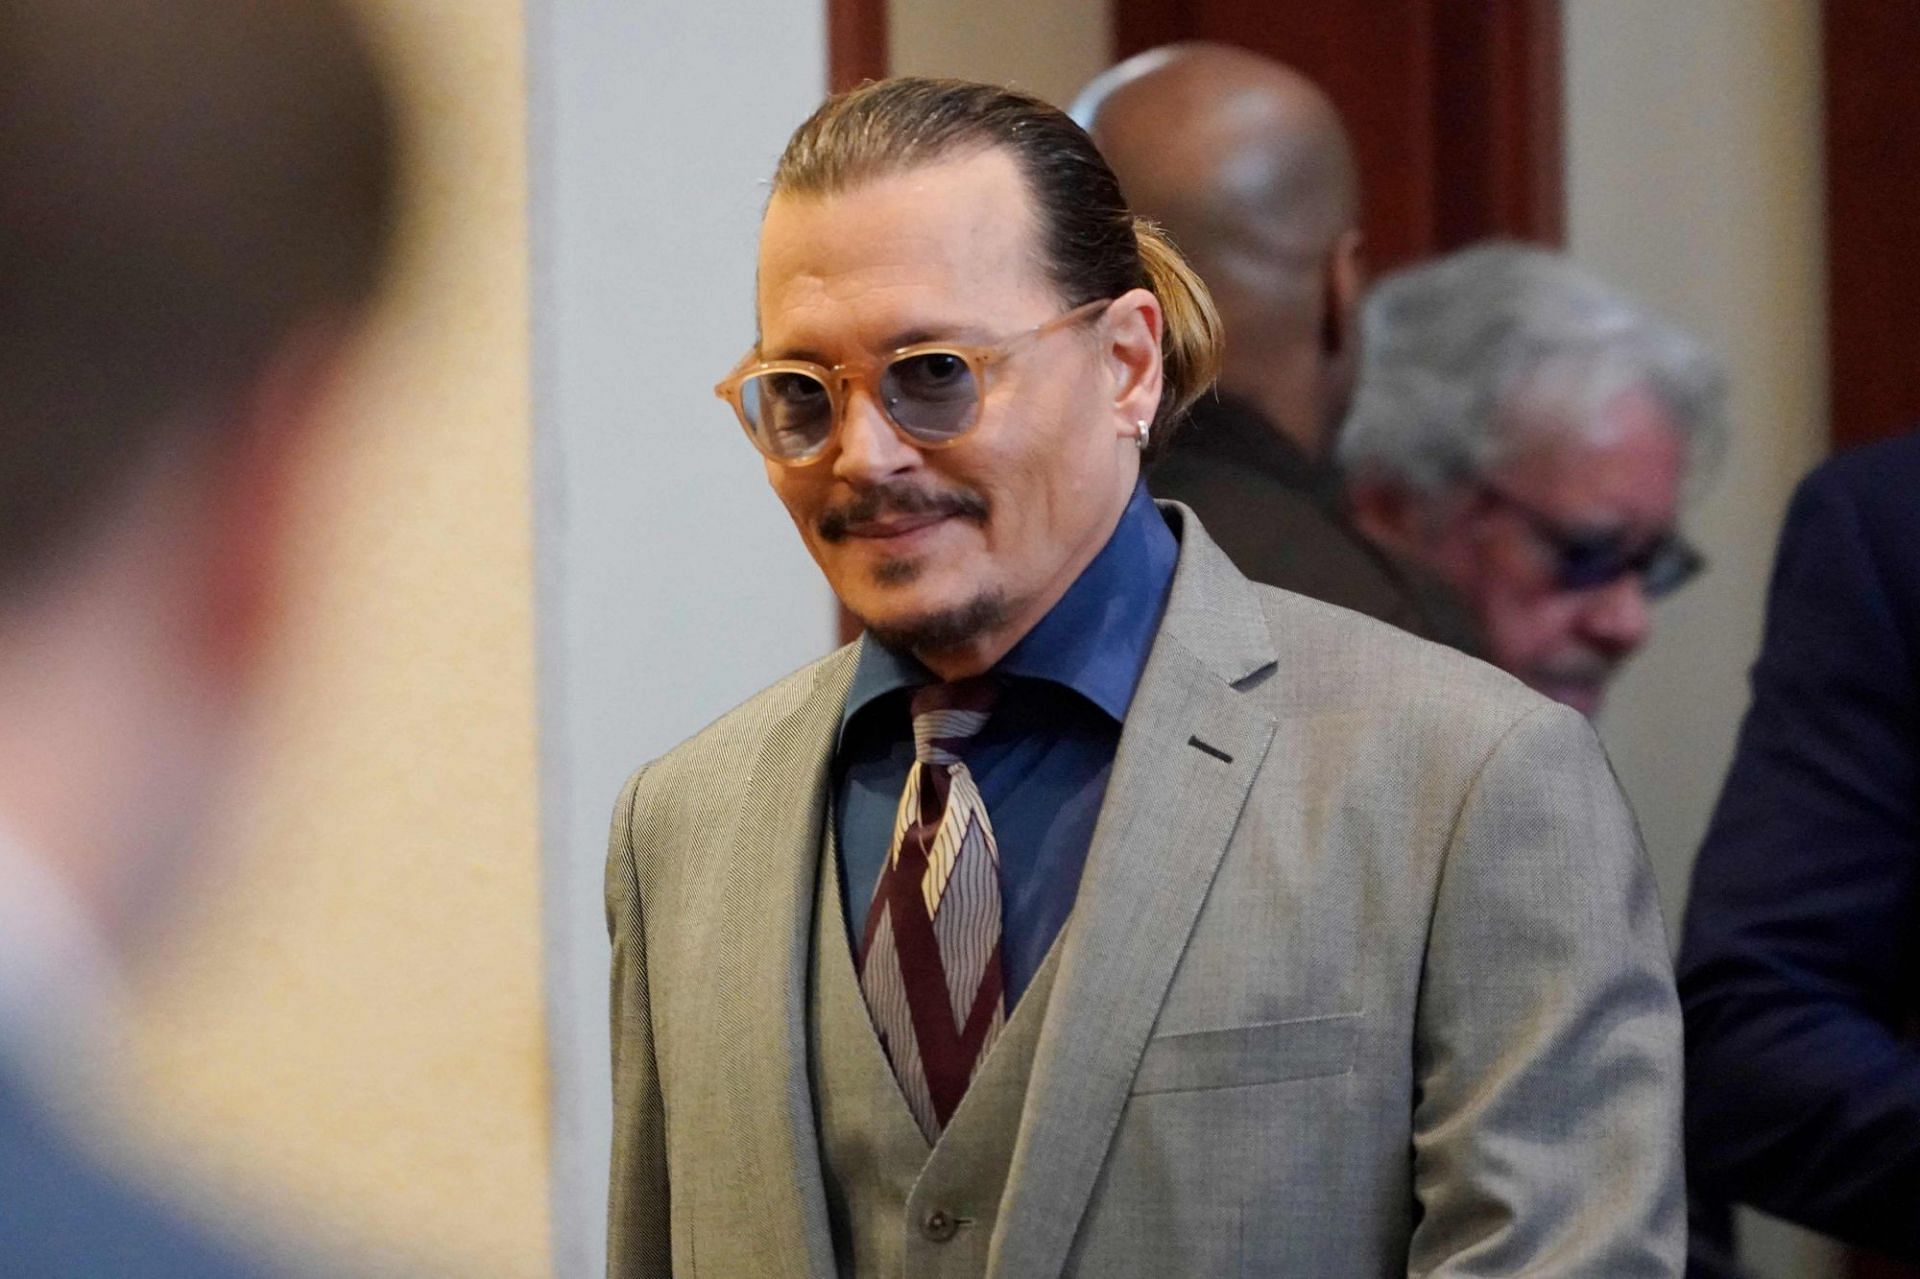 Security helps Johnny Depp outside hotel (Image via GC Images)